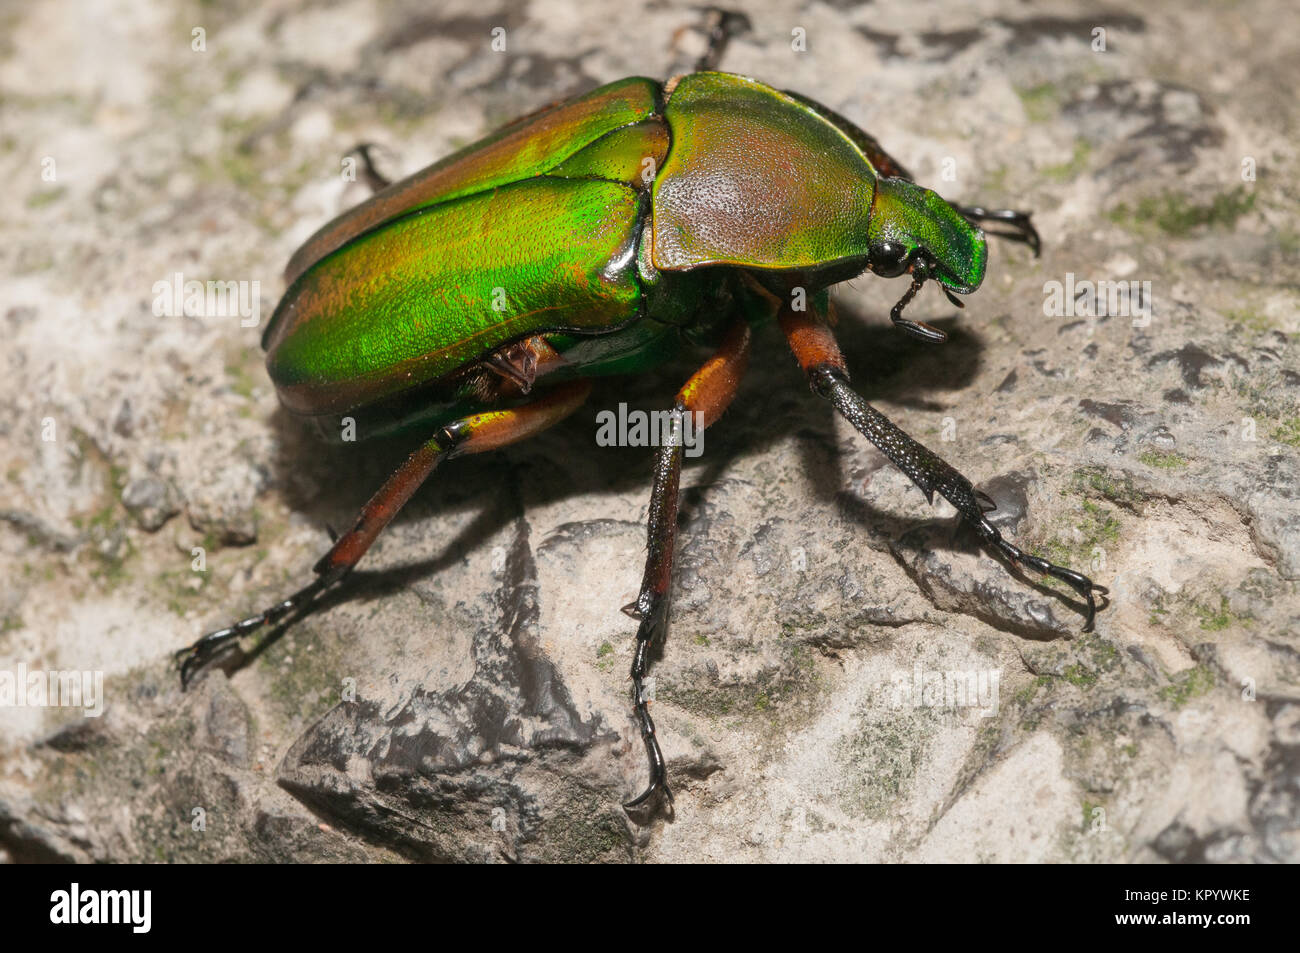 Large green fruit beetle/ chafer from Chongqing, China. Stock Photo